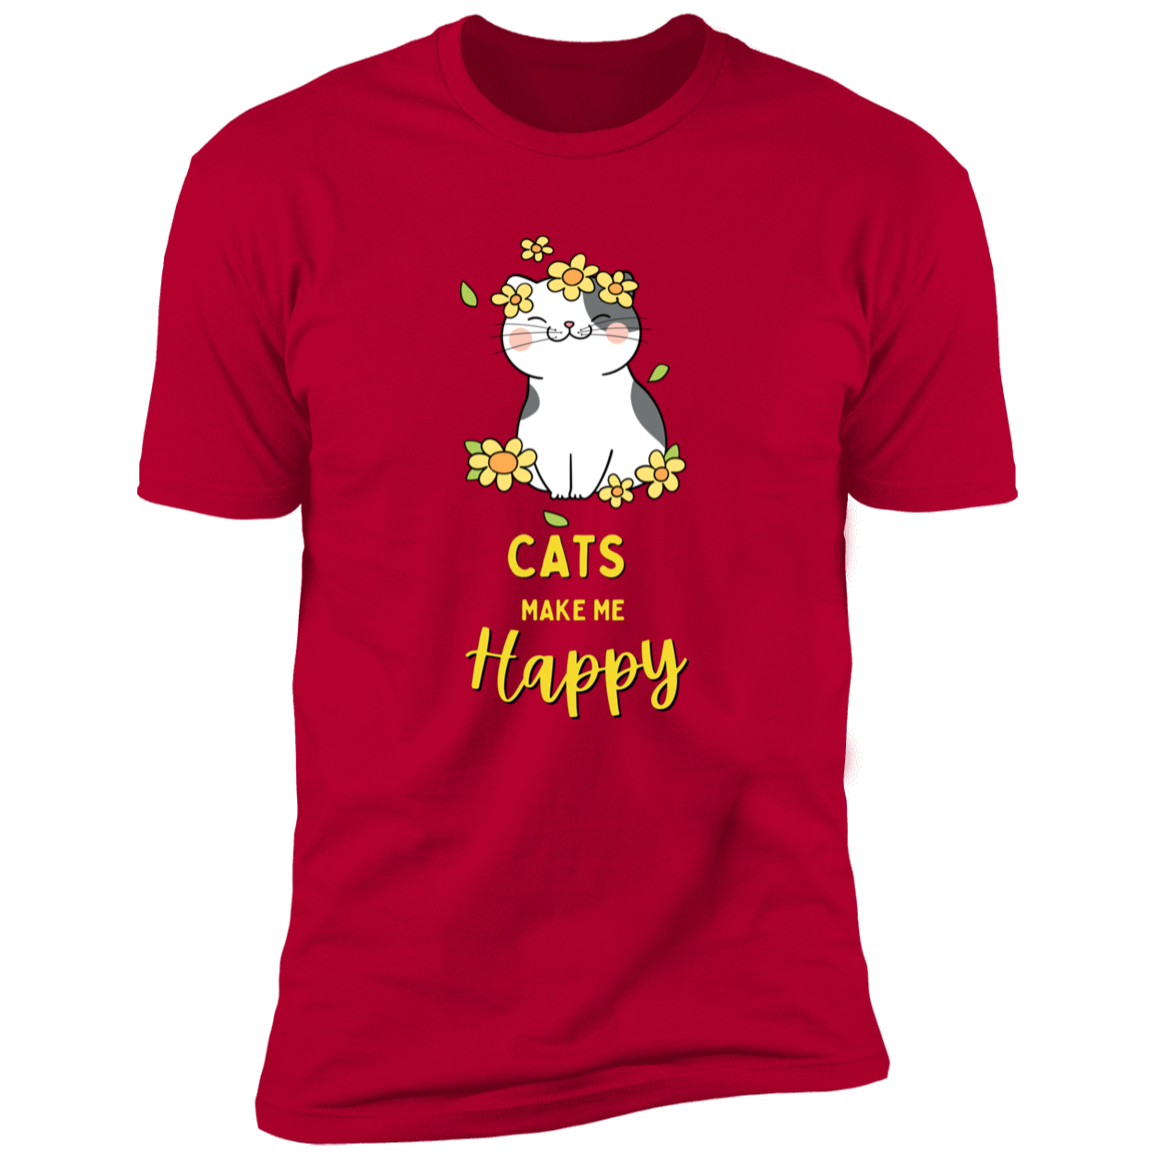 Cats Make Me Happy T-shirt, Cat Shirt for humans, in red